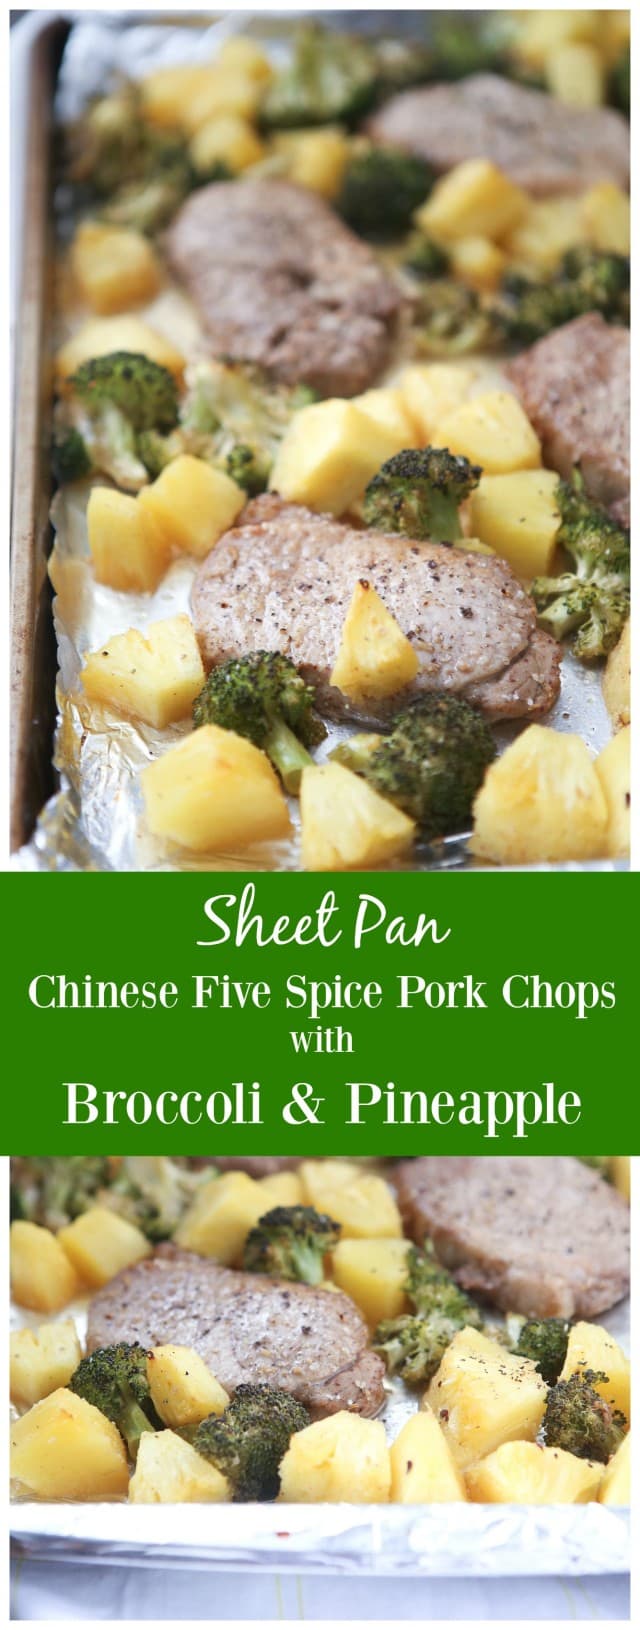 My whole family loved this Chinese Five Spice Pork Chops with Broccoli and Pineapple. Inspired from the Sheet Pan Supper Cookbook! Recipe at aggieskitchen.com